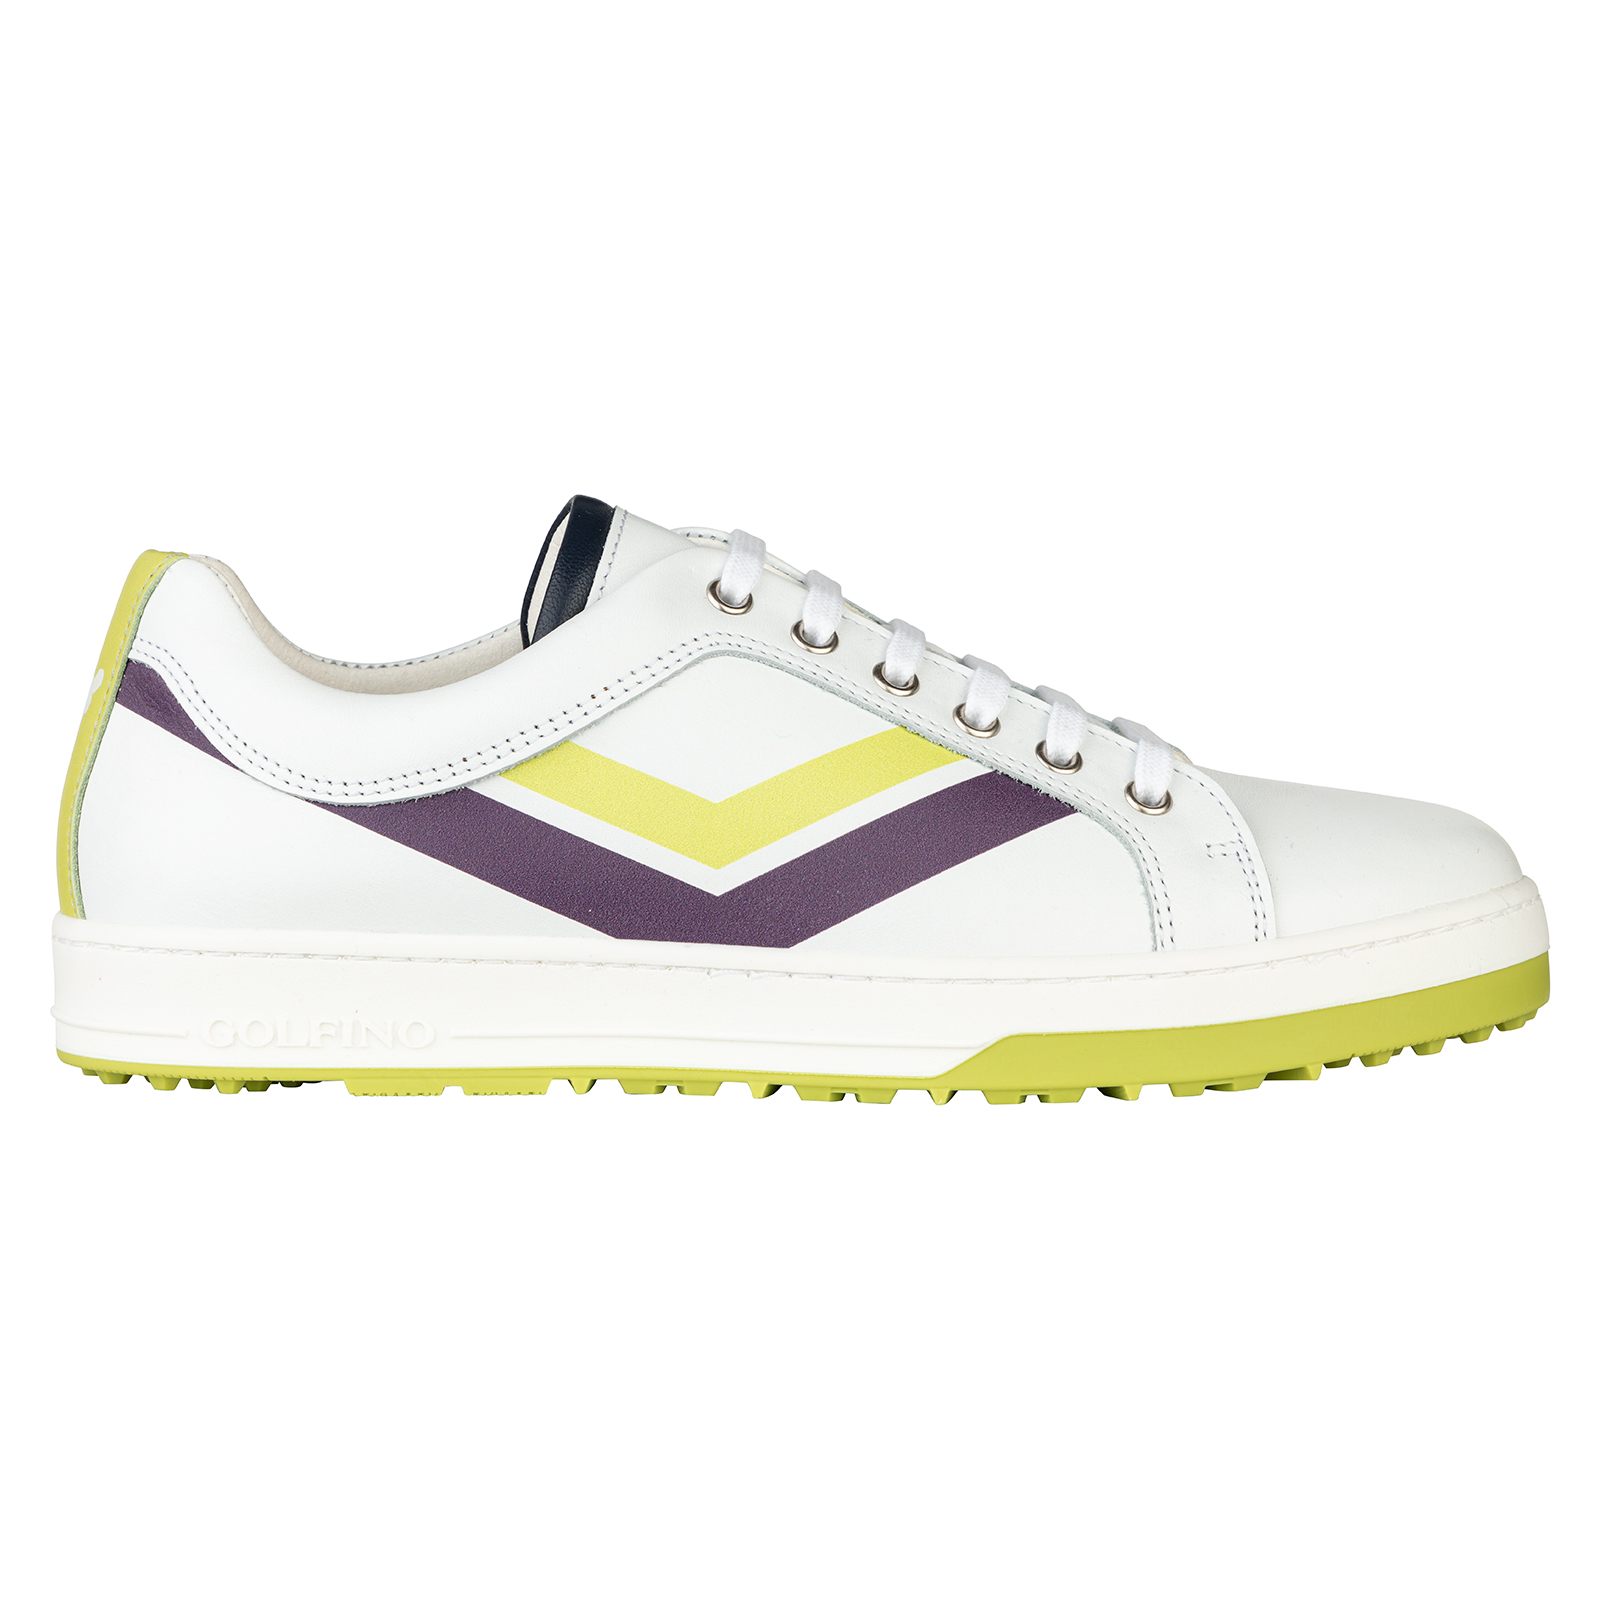 Ladies' stylish water-repellent genuine leather golf shoes 